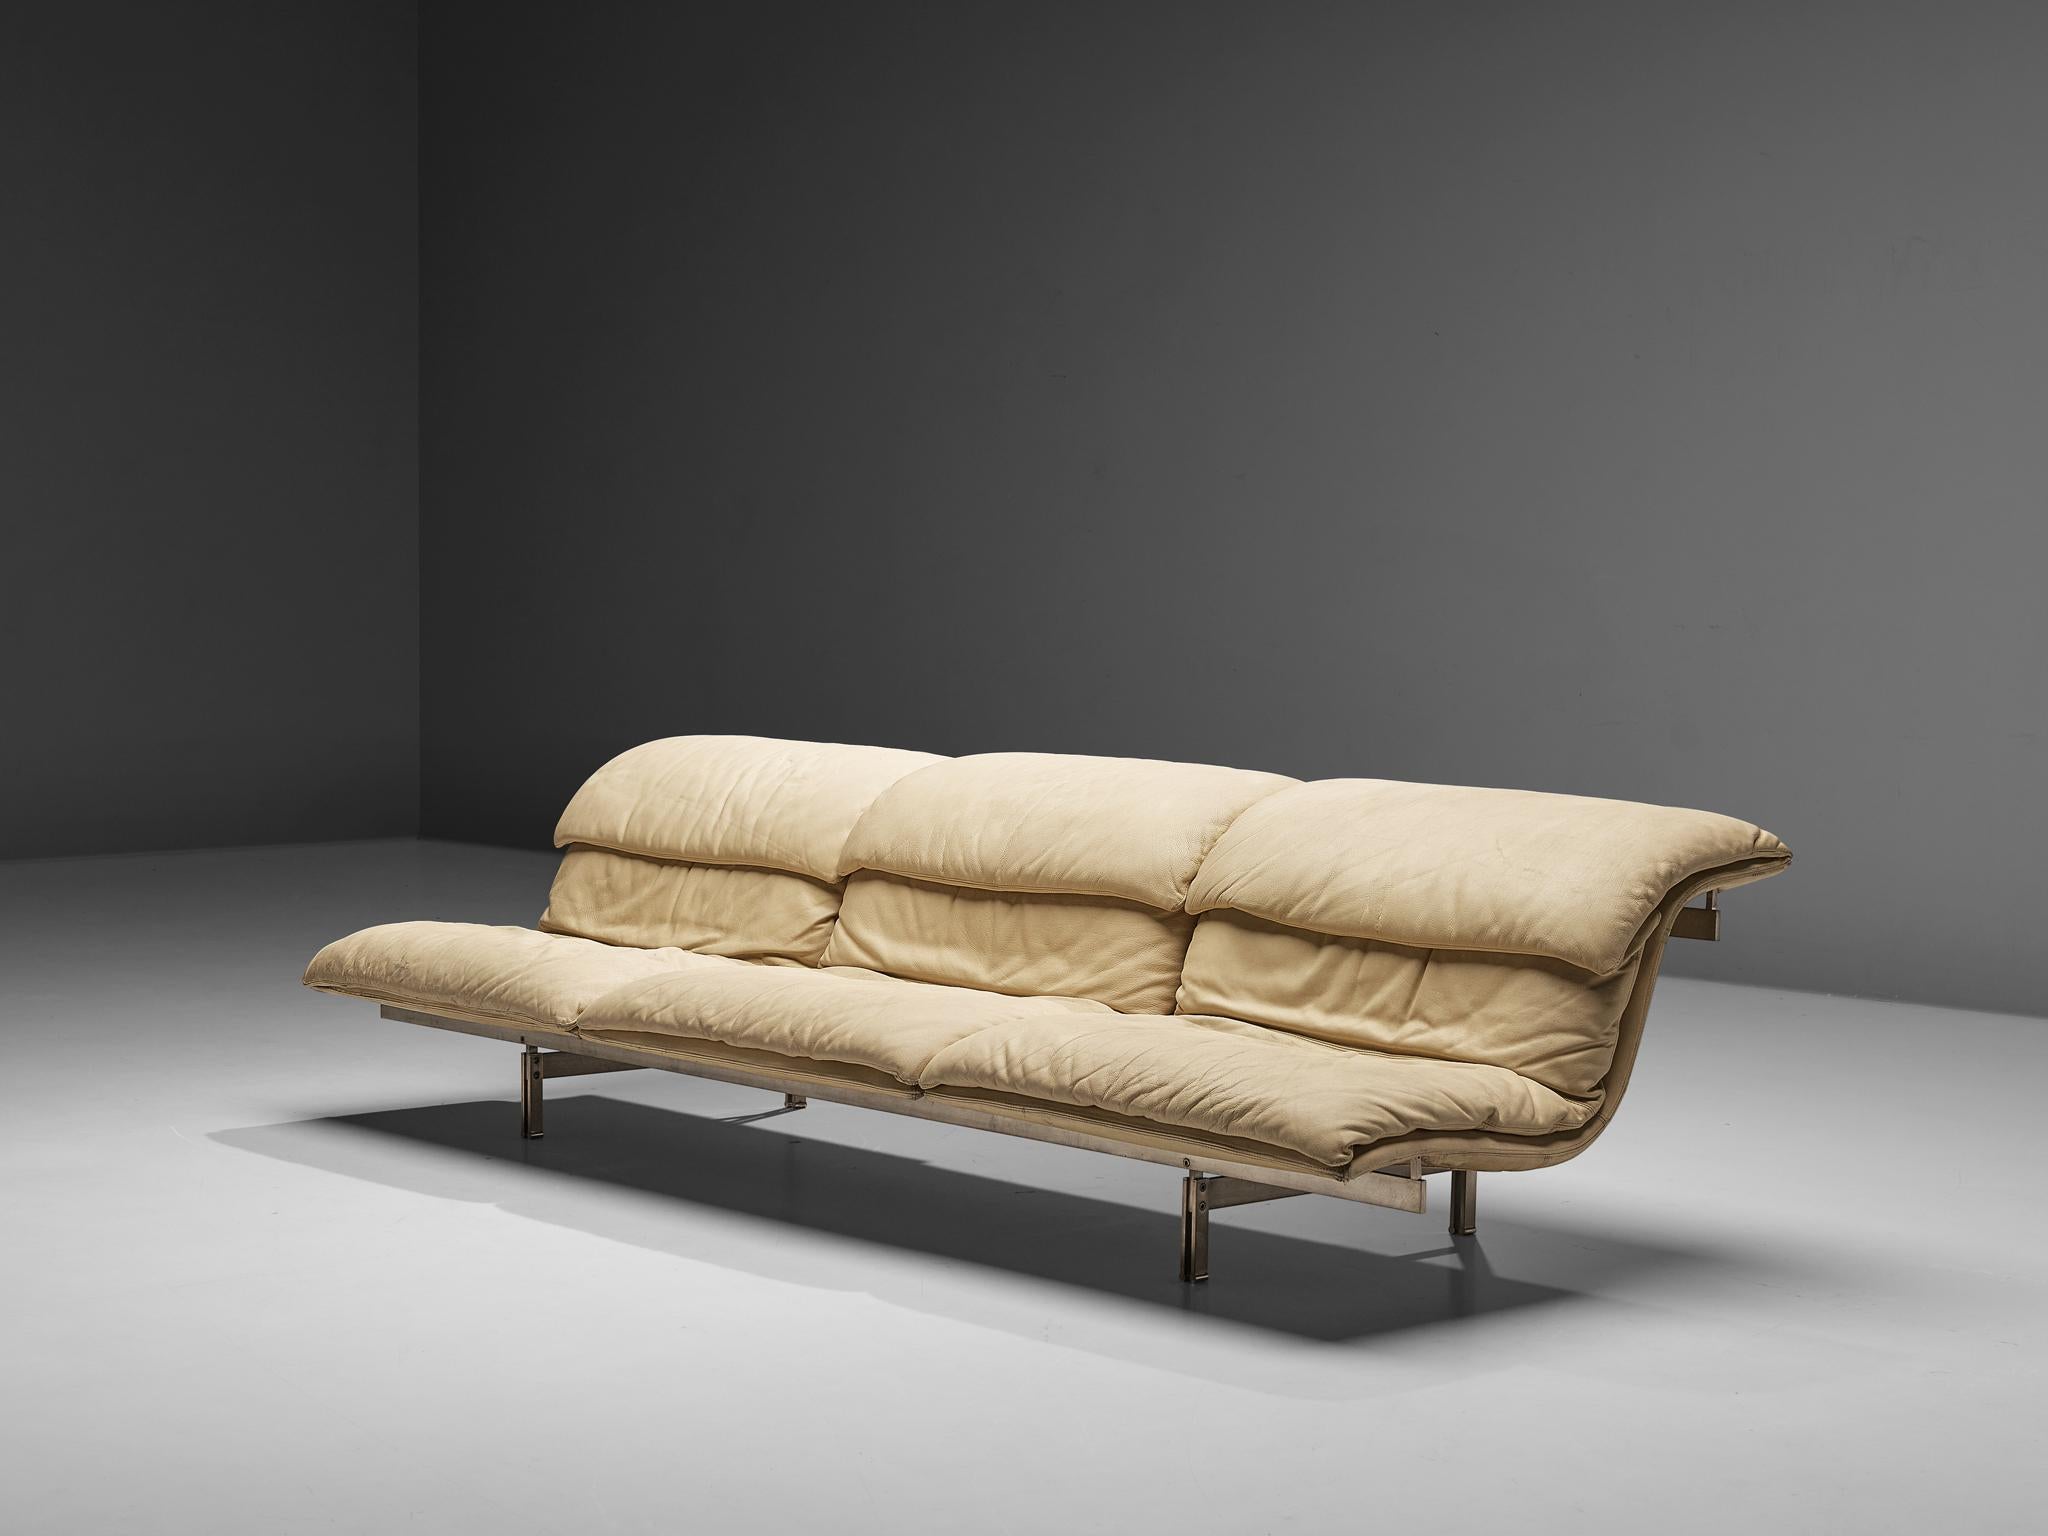 Giovanni Offredi for Saporiti, sofa, leather, steel, Italy, 1974.

This iconic 'wave' sofa was designed by Giovanni Offredi in 1974. The design for this sofa is dynamic, sculptural and figurative. The sofa is archetypical for Italian design of the